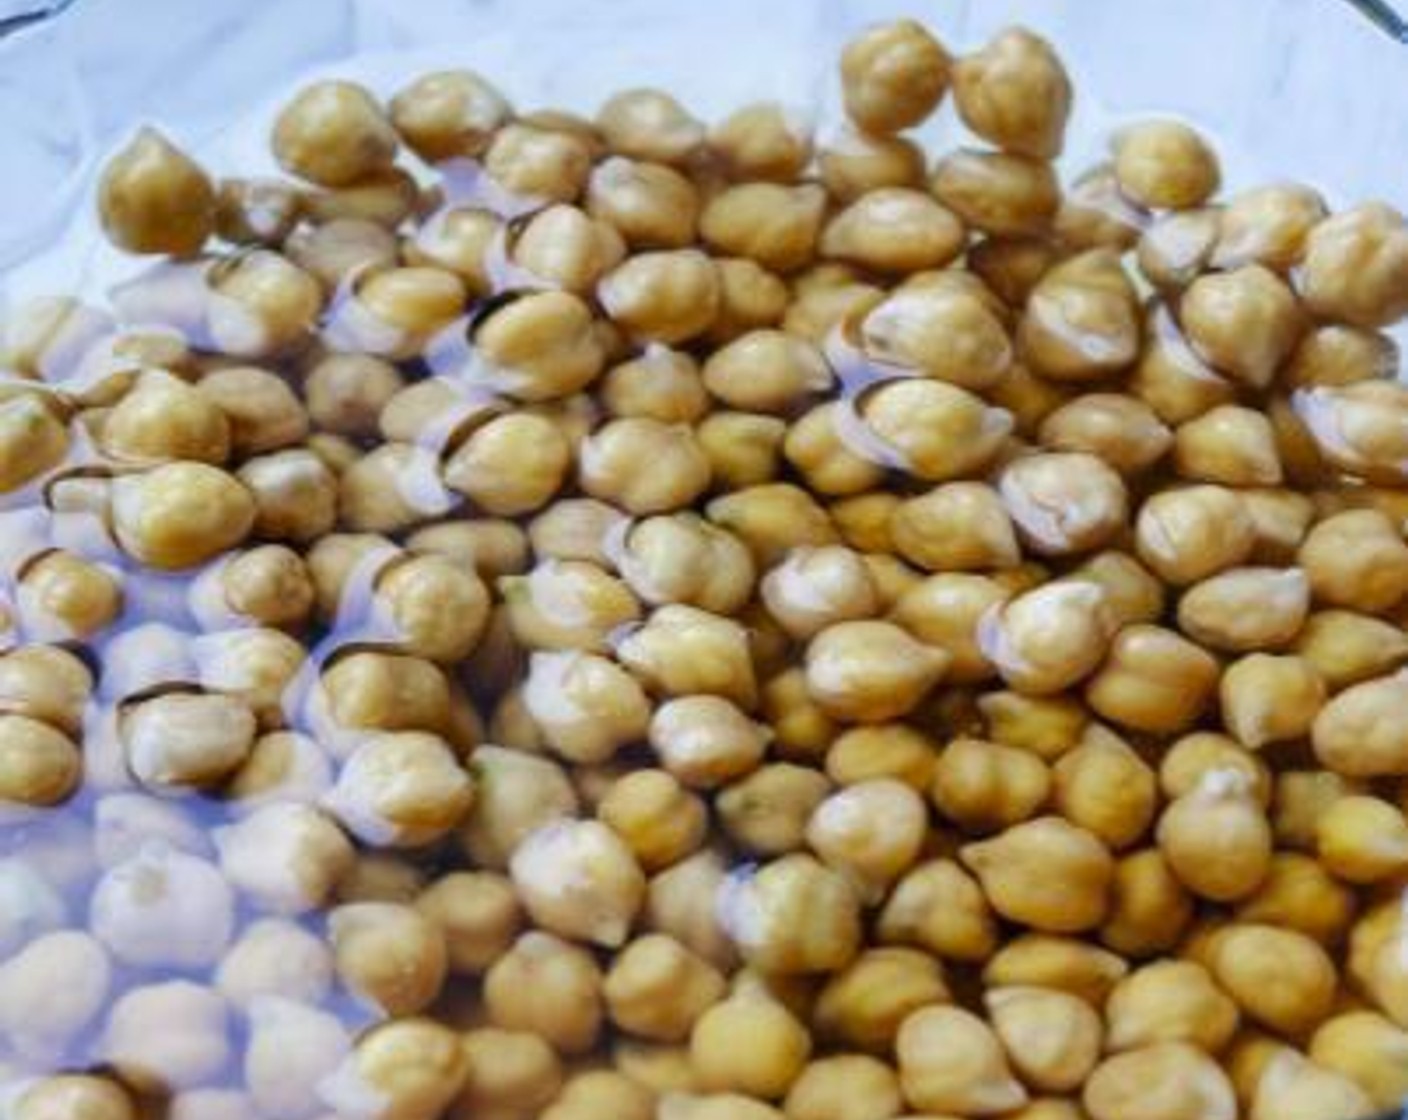 step 1 Start off by rinsing the Dried Chickpeas (1 1/4 cups) under clean filtered water. Place them in a bowl, cover with Salt (to taste) and let them soak for 8-12 hours or overnight